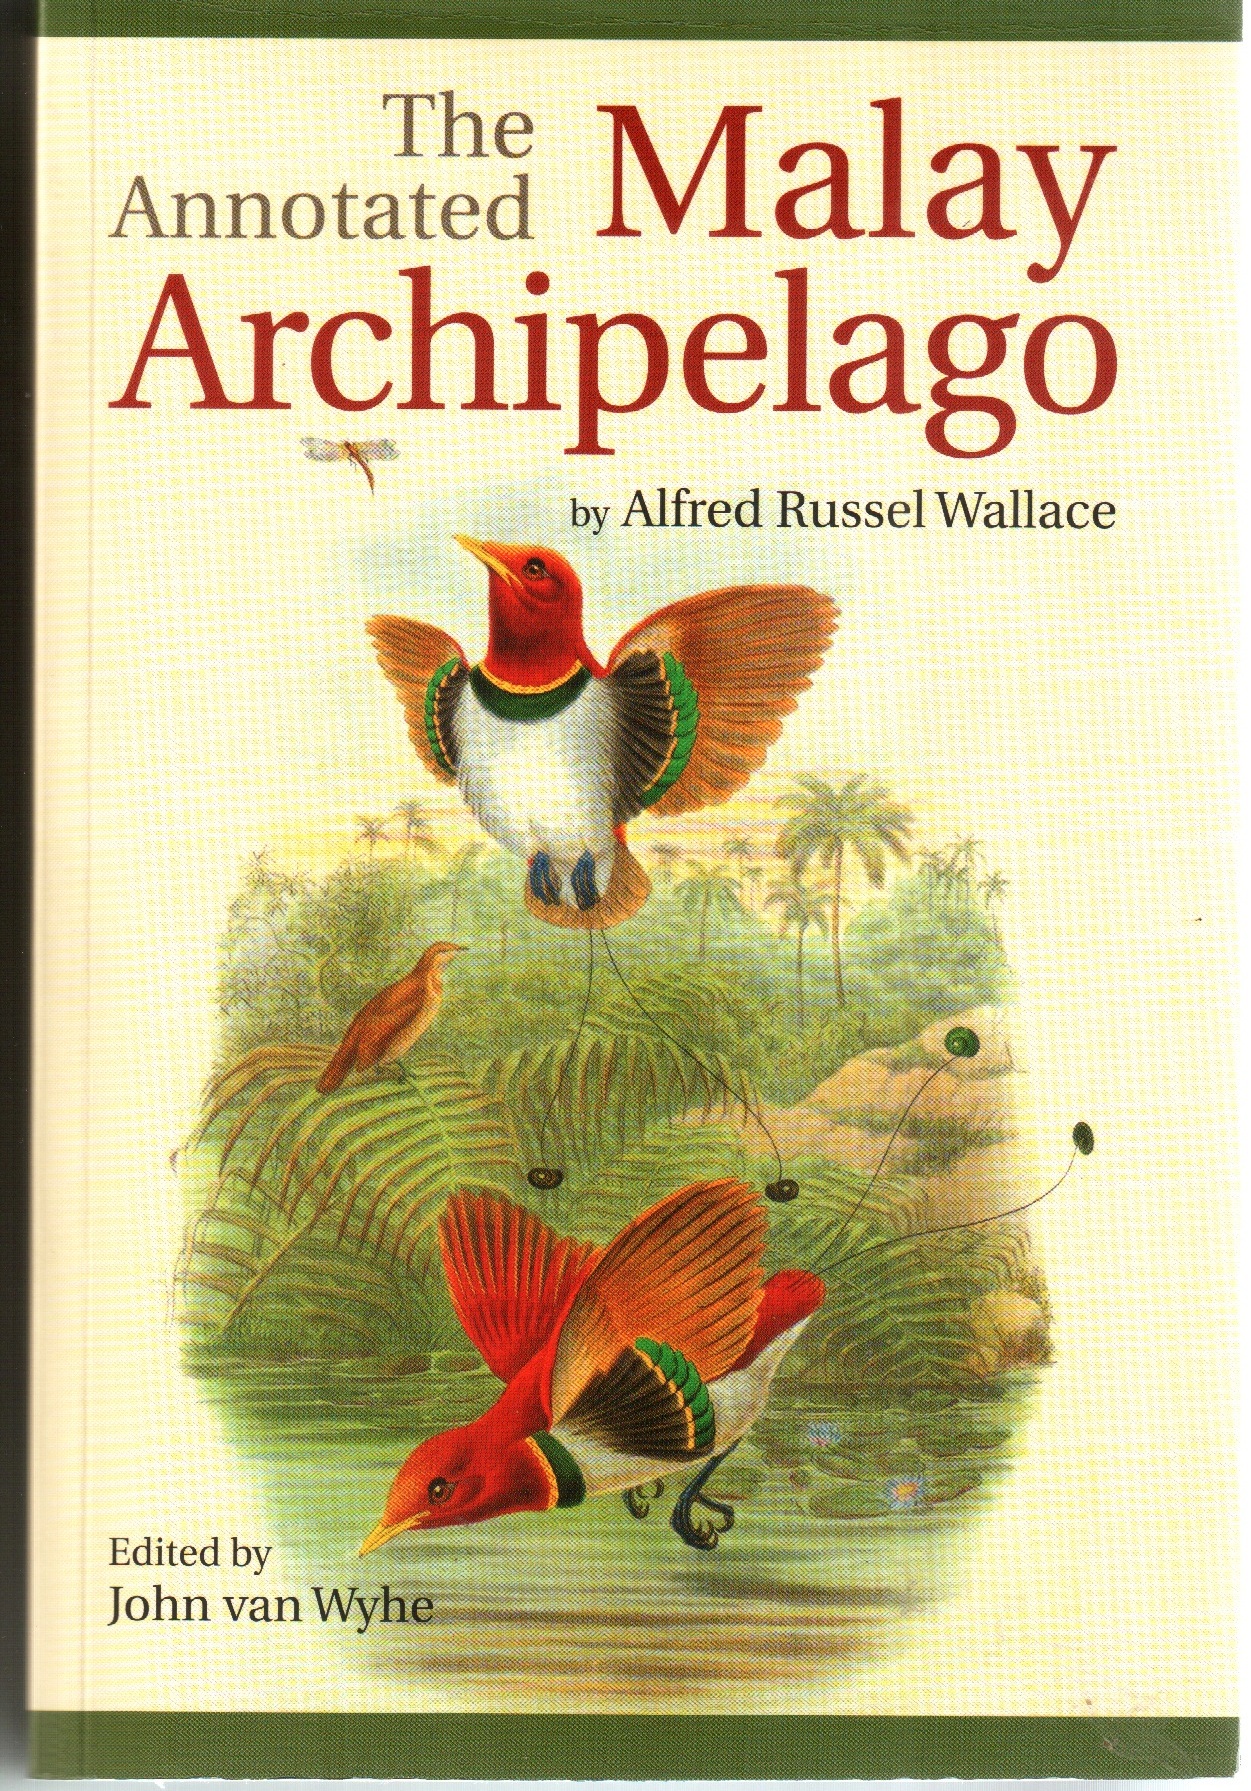 The Malay Archipelago - Alfred Russell Wallace (new edition)